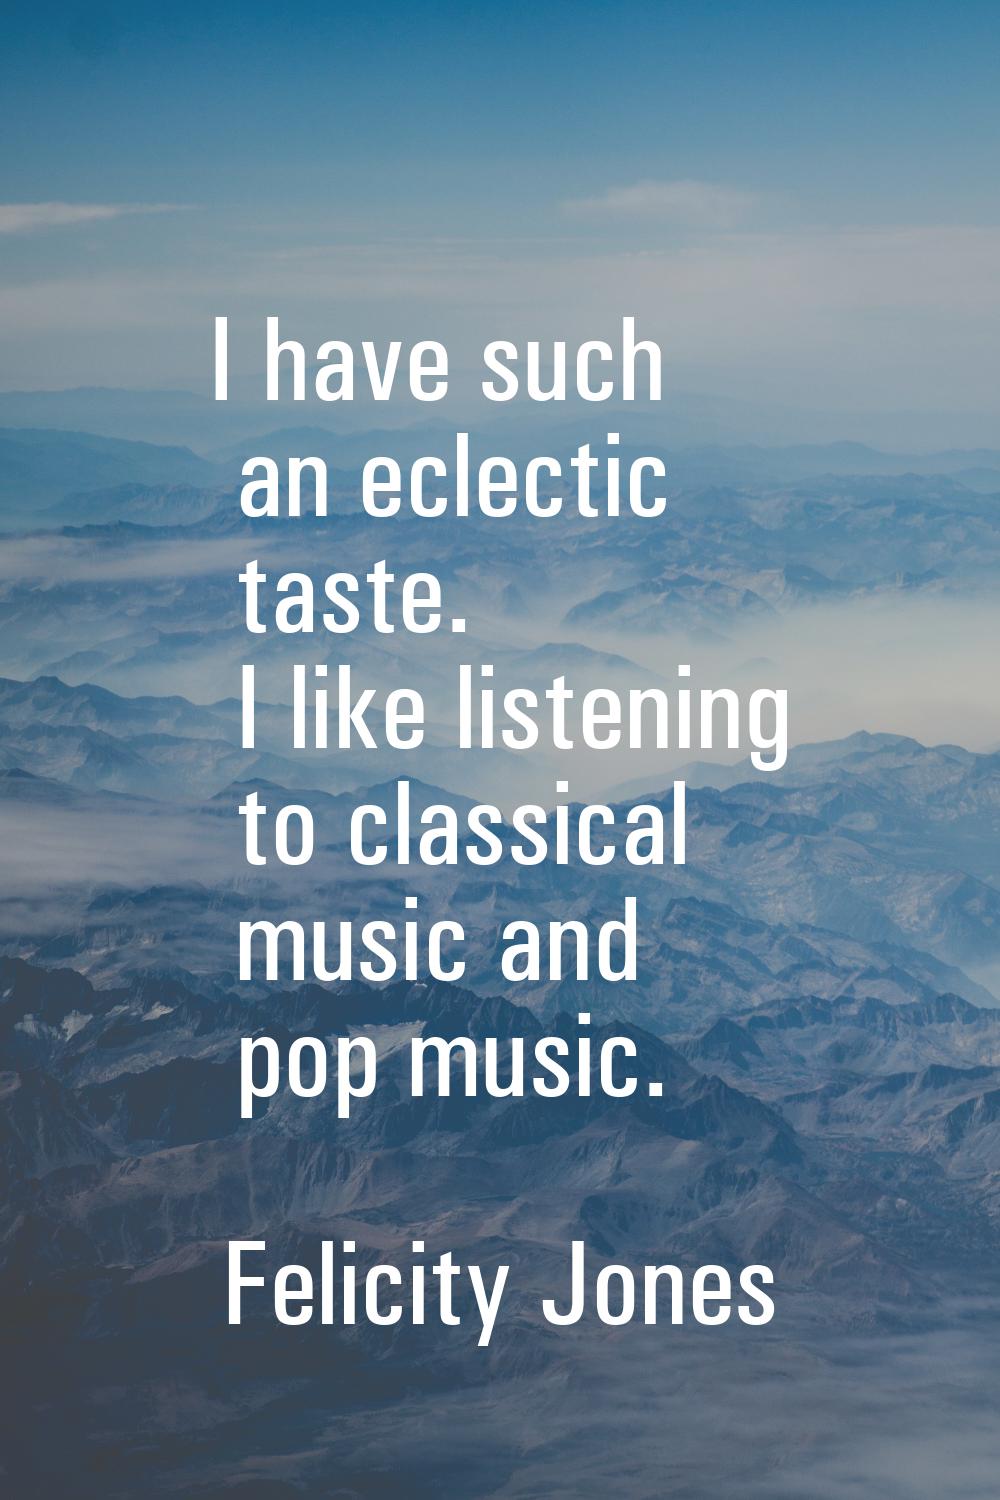 I have such an eclectic taste. I like listening to classical music and pop music.